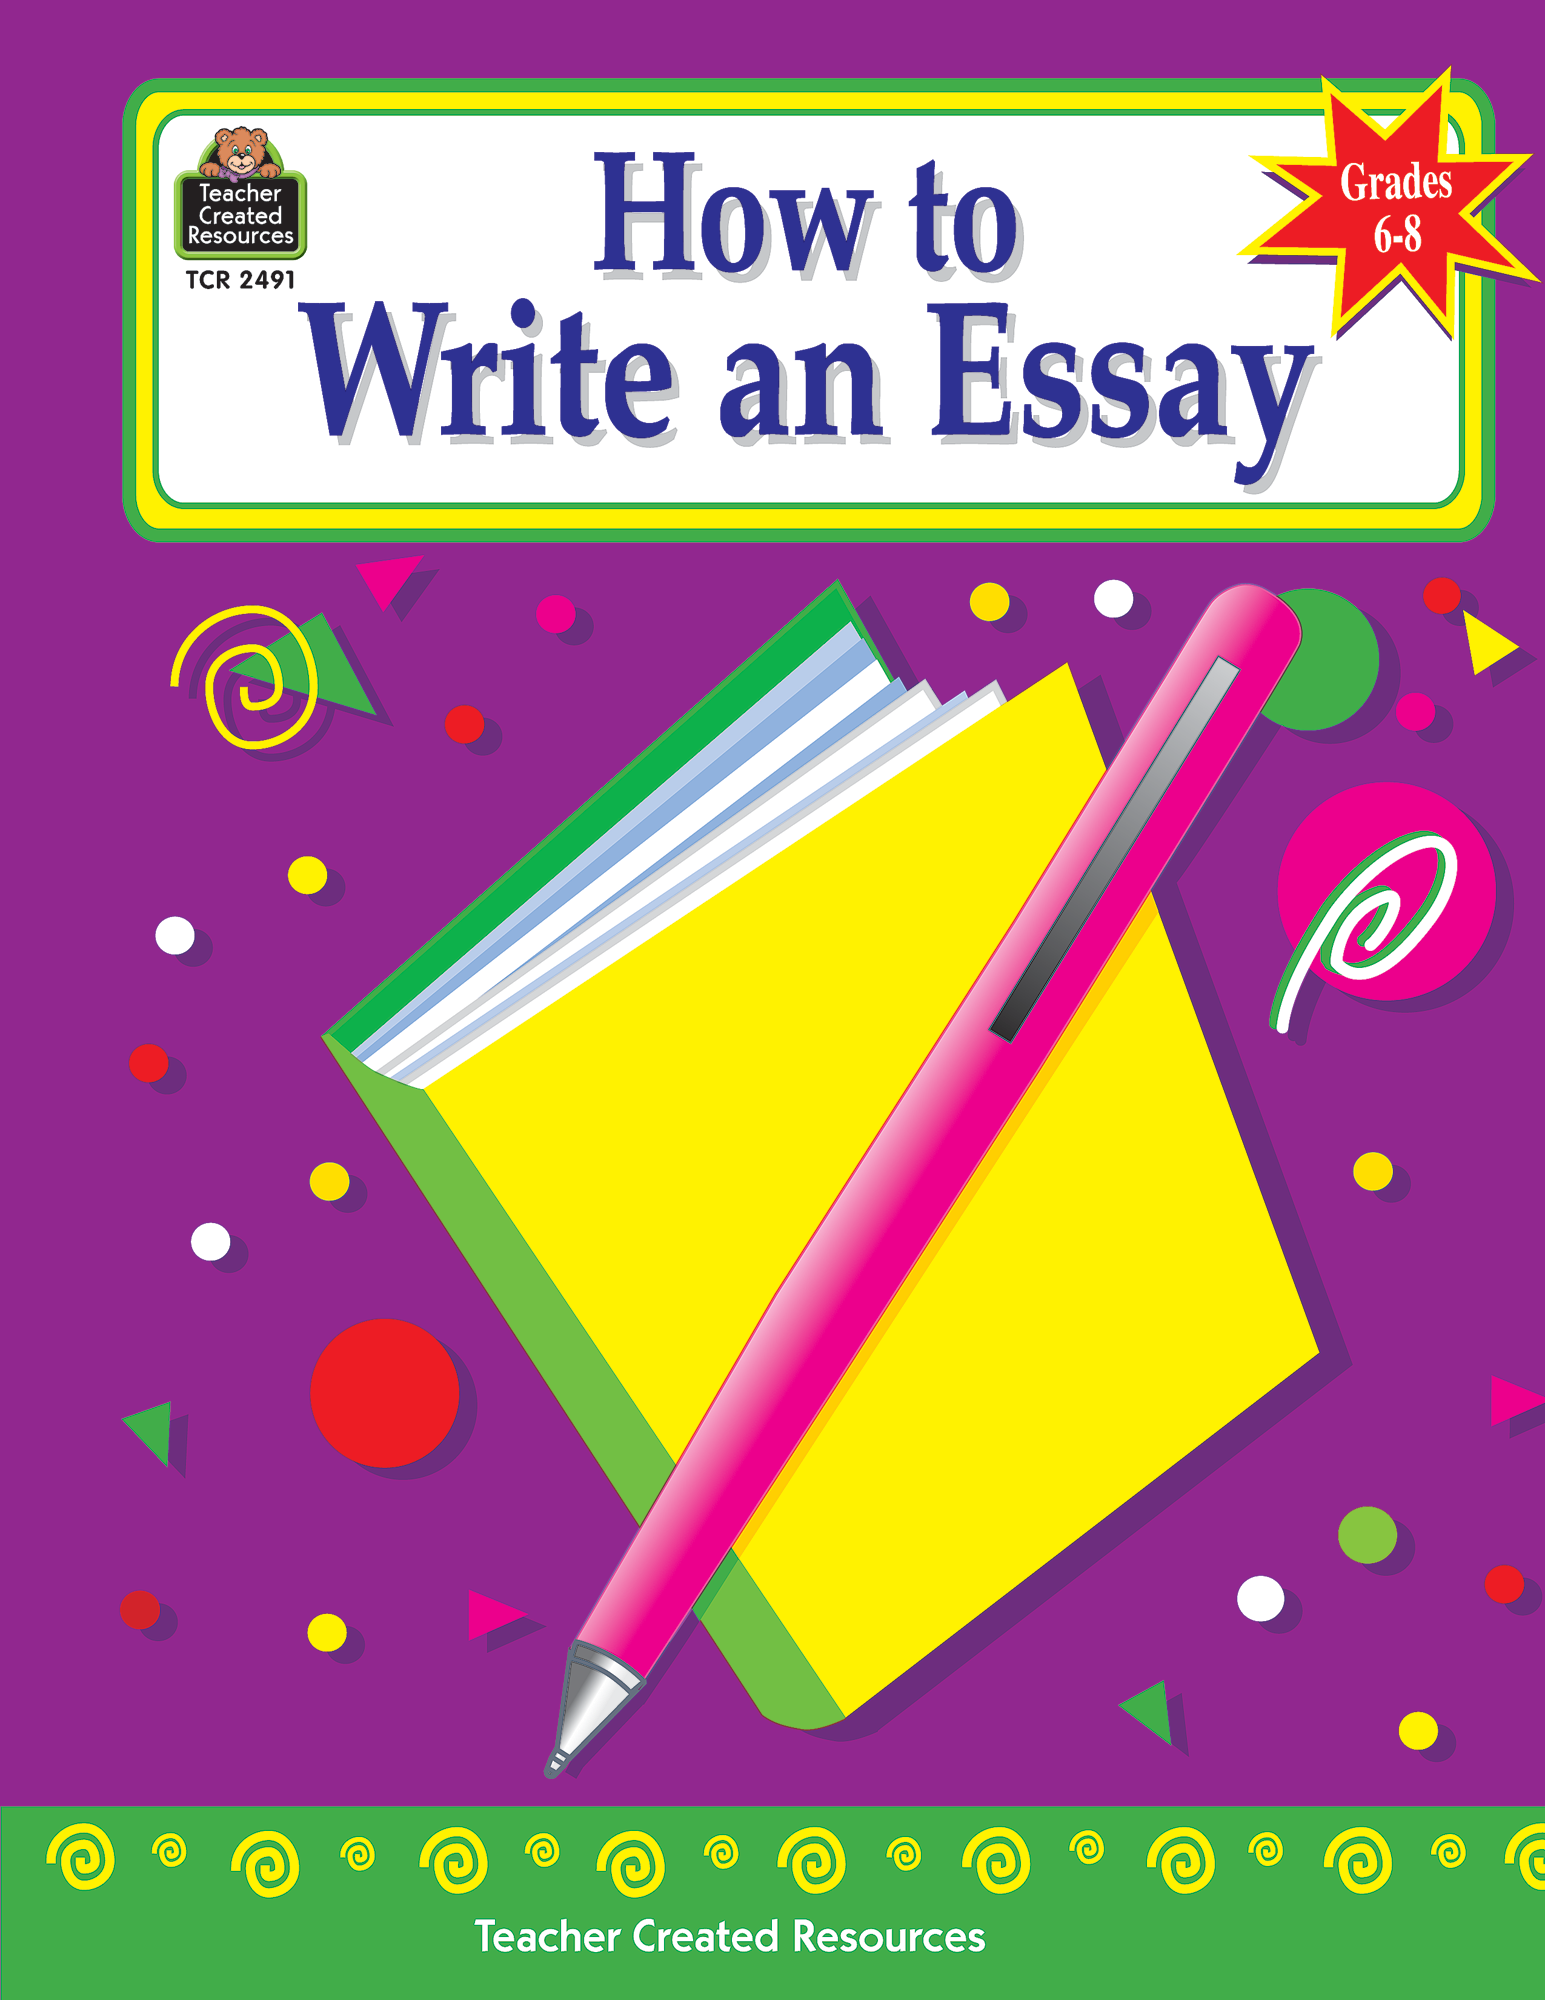 how-to-write-an-essay-grades-6-8-tcr2491-teacher-created-resources